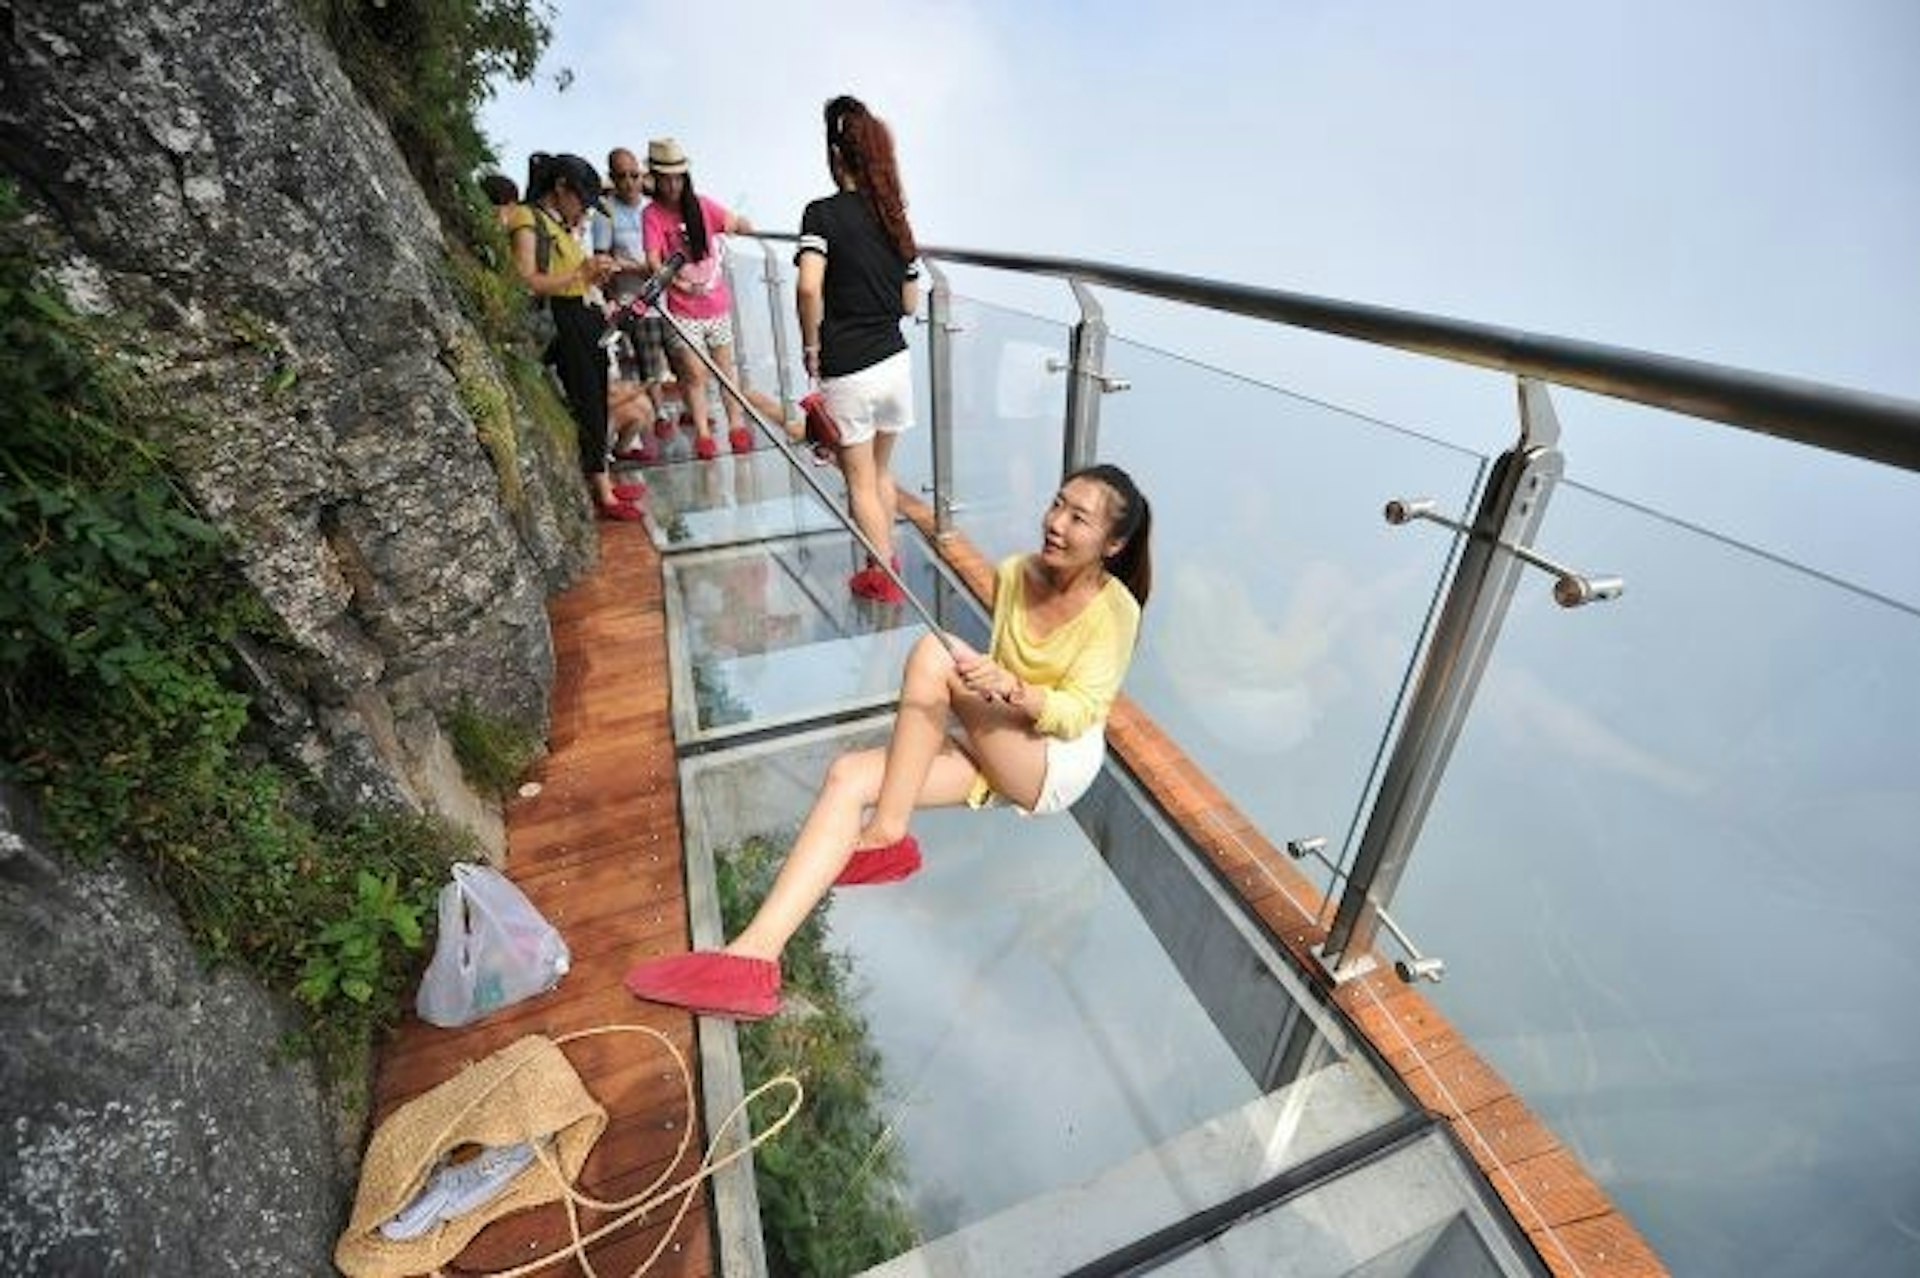 People crossing a glass bridge in China